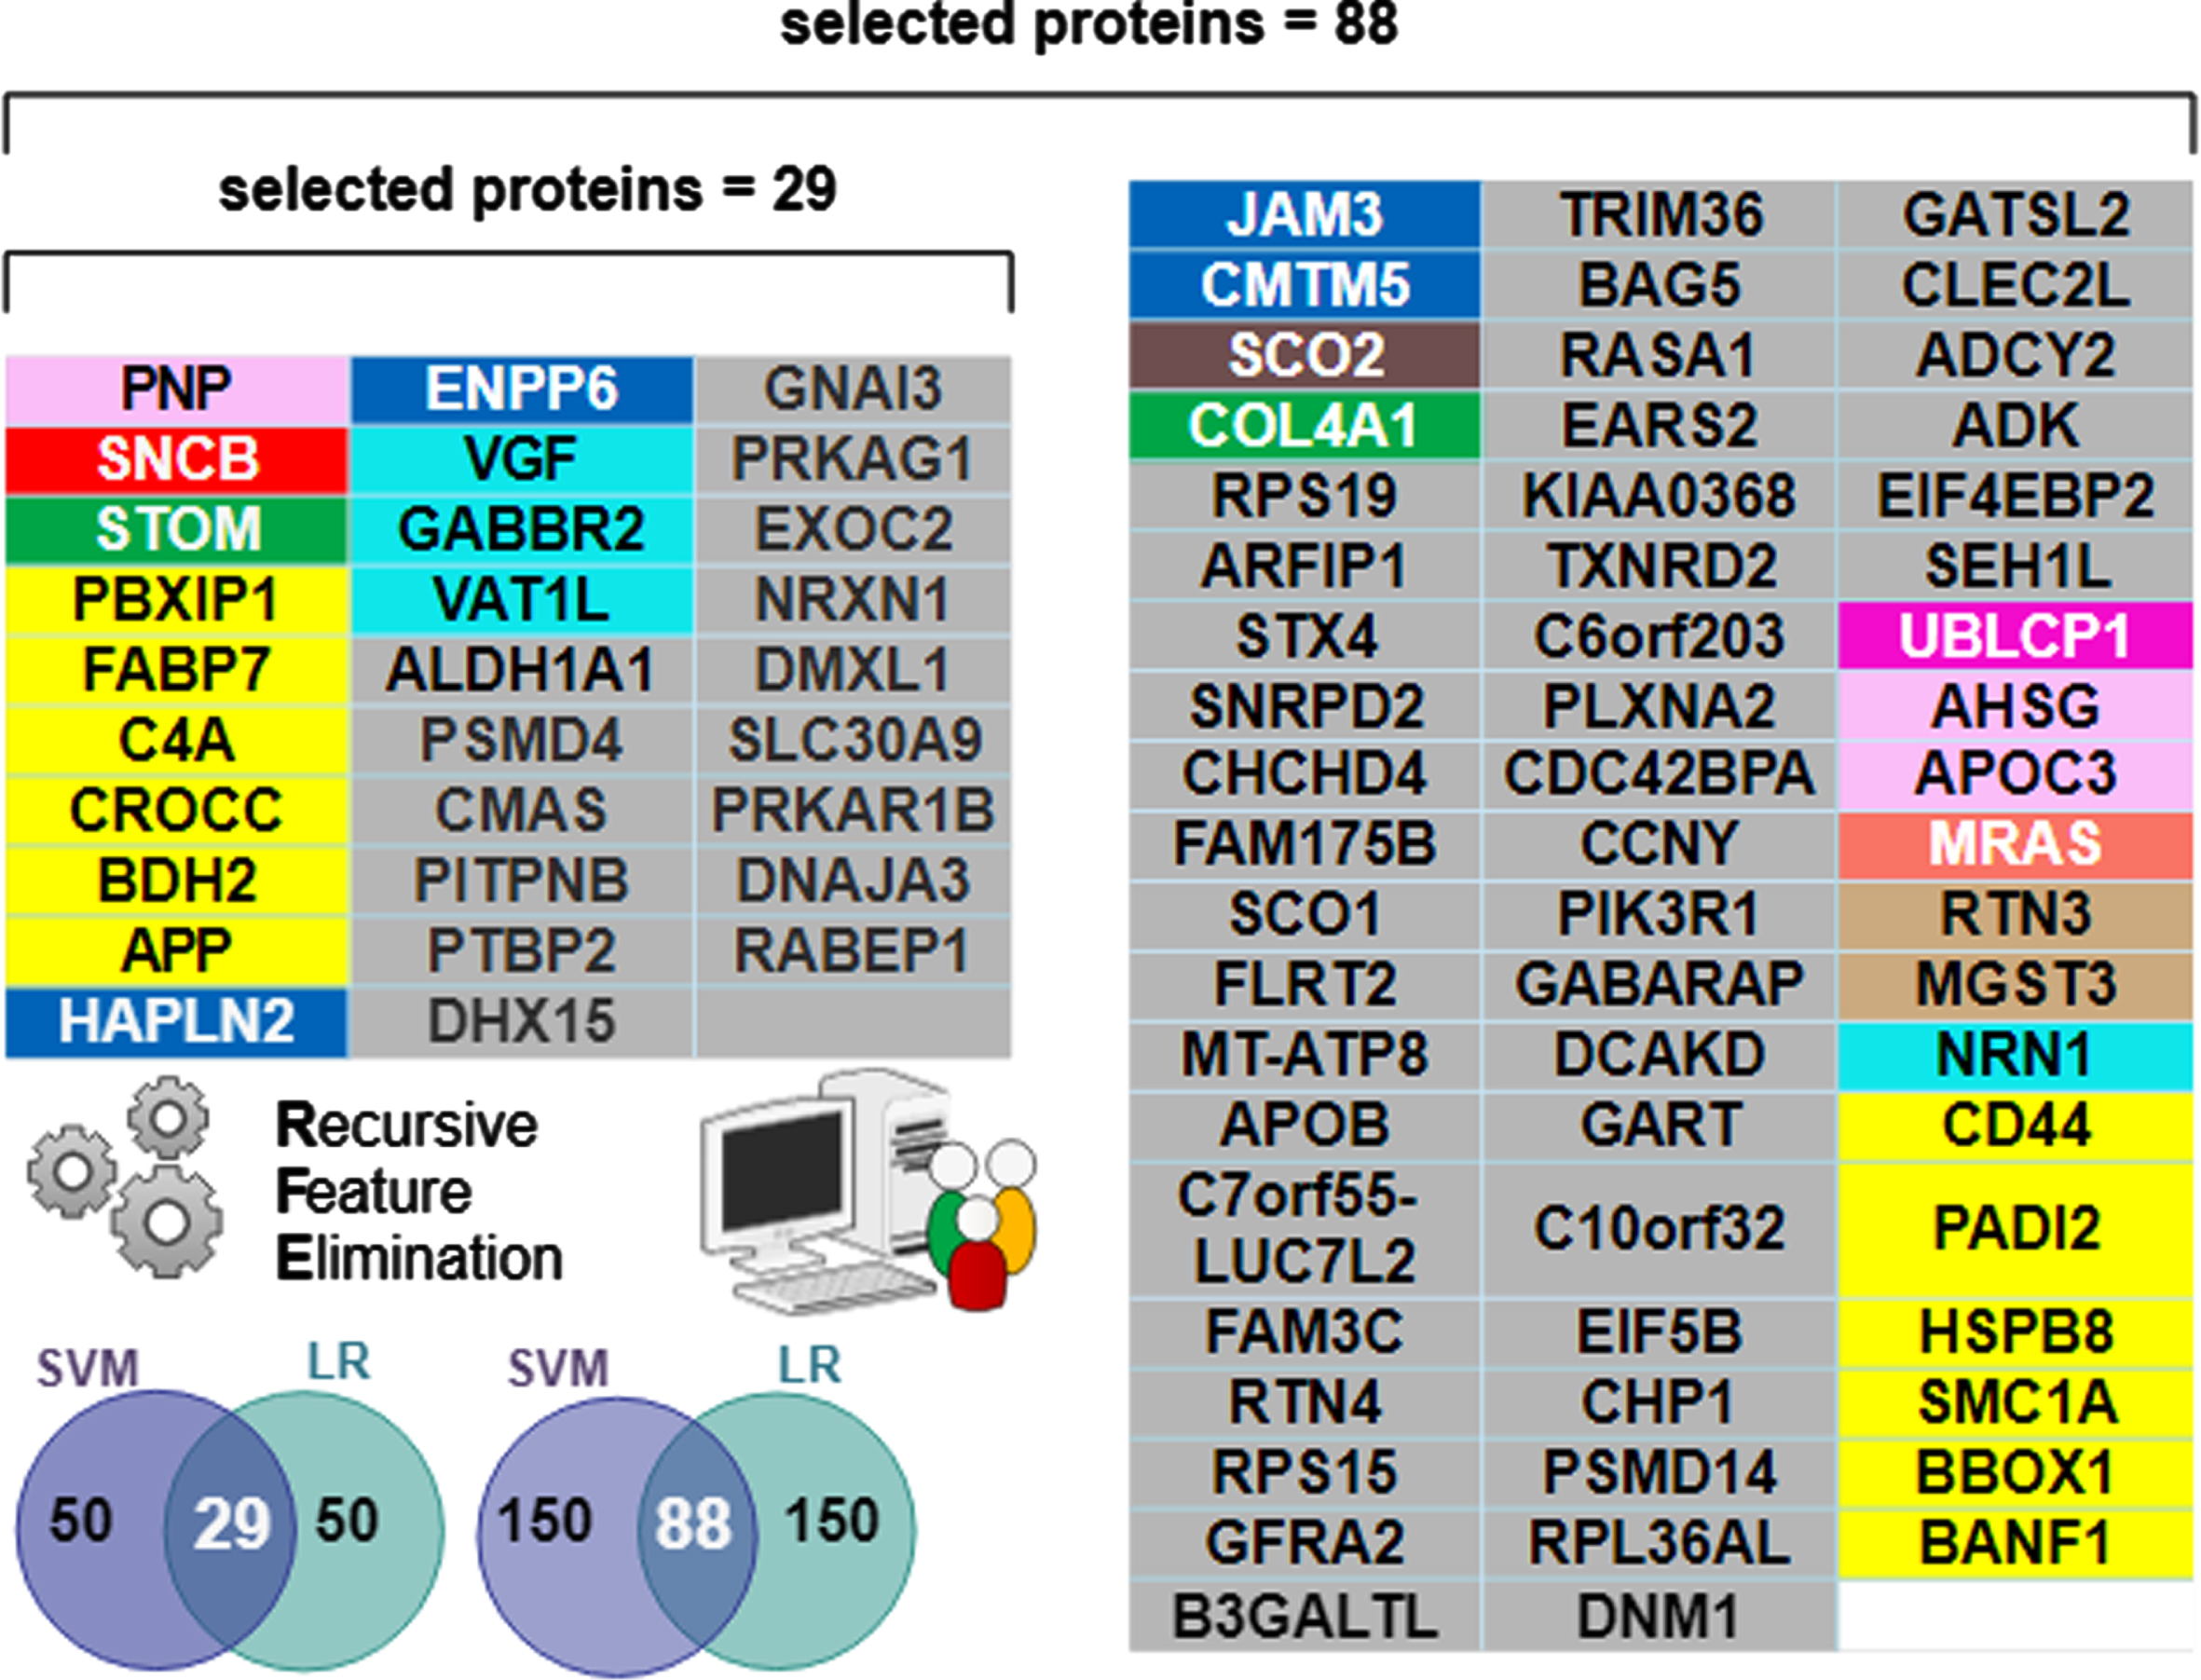 Individual proteins comprising the selected “best” predictive protein subsets color-coded by functional module. The n = 29 subset was sufficient for differentiating AD from Control. However, the n = 88 subset was optimal for differentiating AD and AsymAD. Note all 29 proteins in the n = 29 selected set are contained within the n = 88 selected set. The Venn diagram inset pictorially summarizes the Recursive Feature Elimination (RFE) algorithm used to select the best protein subsets. The intersecting predictive proteins selected by both the support vector machine (SVM) and logistic regression (LR) classifiers during RFE became the “best proteins”. A RFE criterion = 50 resulted in 29 best proteins (e.g., intersection shown on the left Venn inset). A RFE criterion = 150 resulted in 88 best proteins (intersection shown on the right Venn inset).